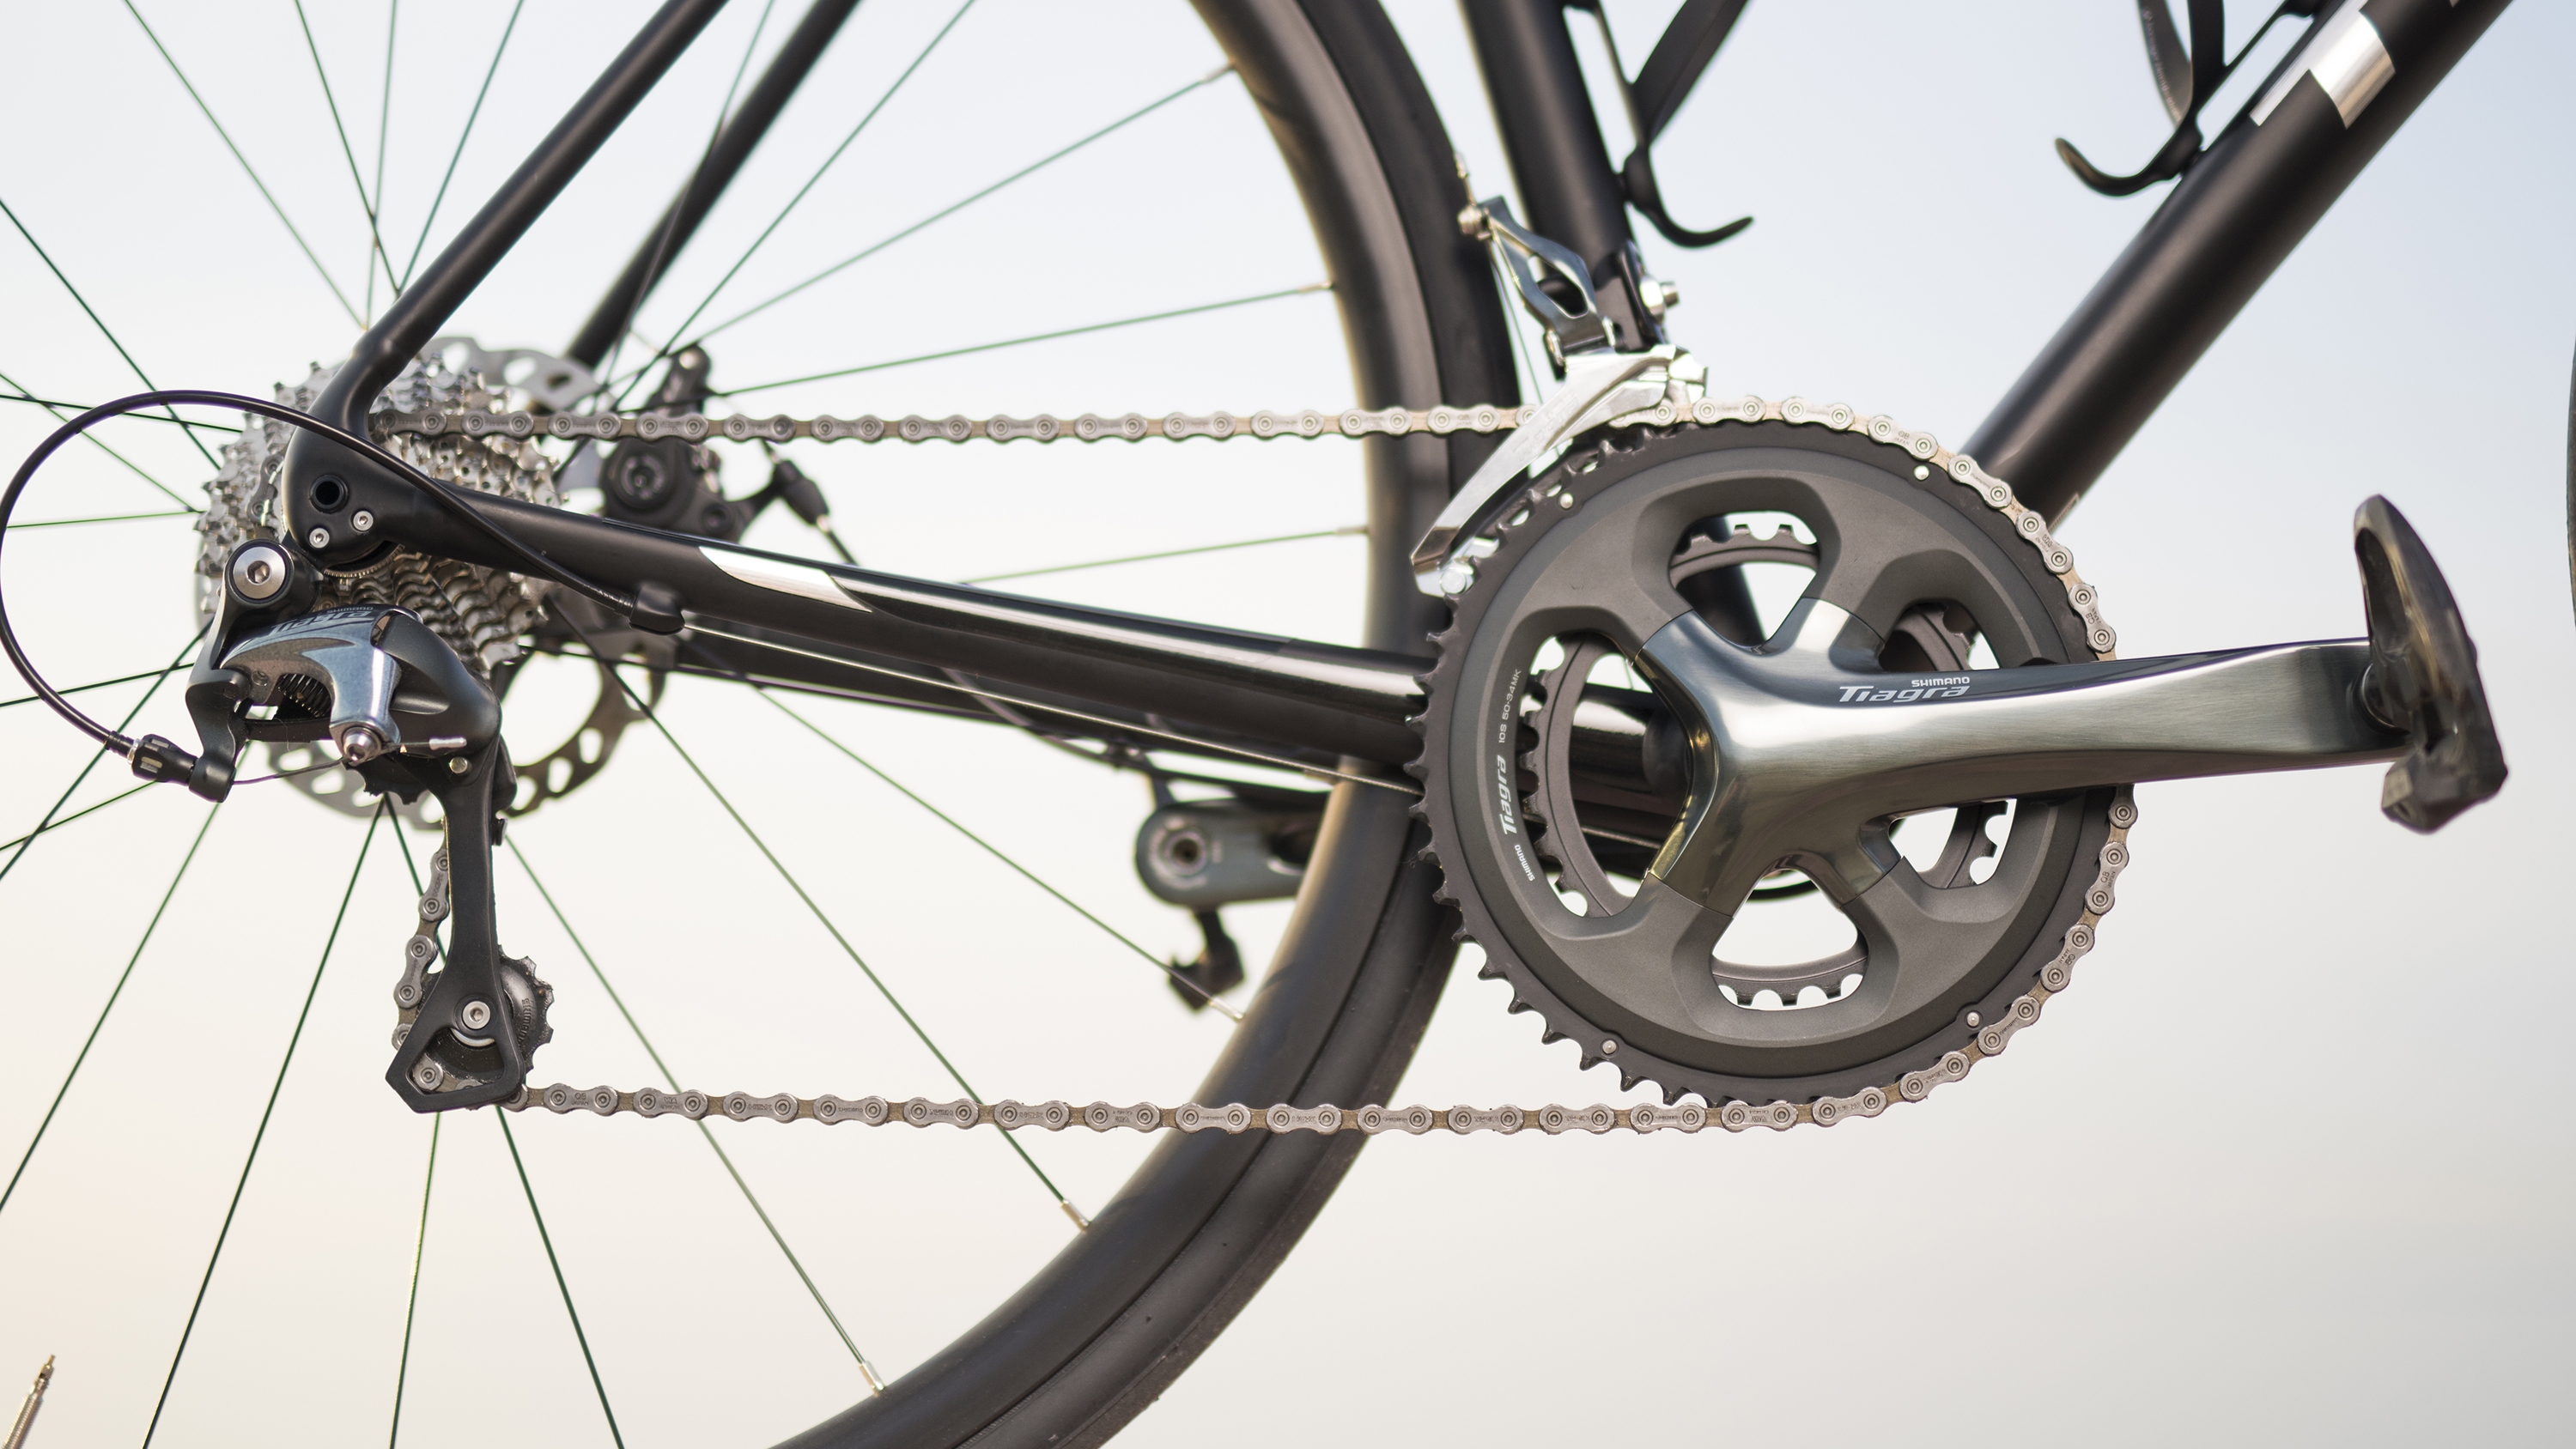 the bicycle chain